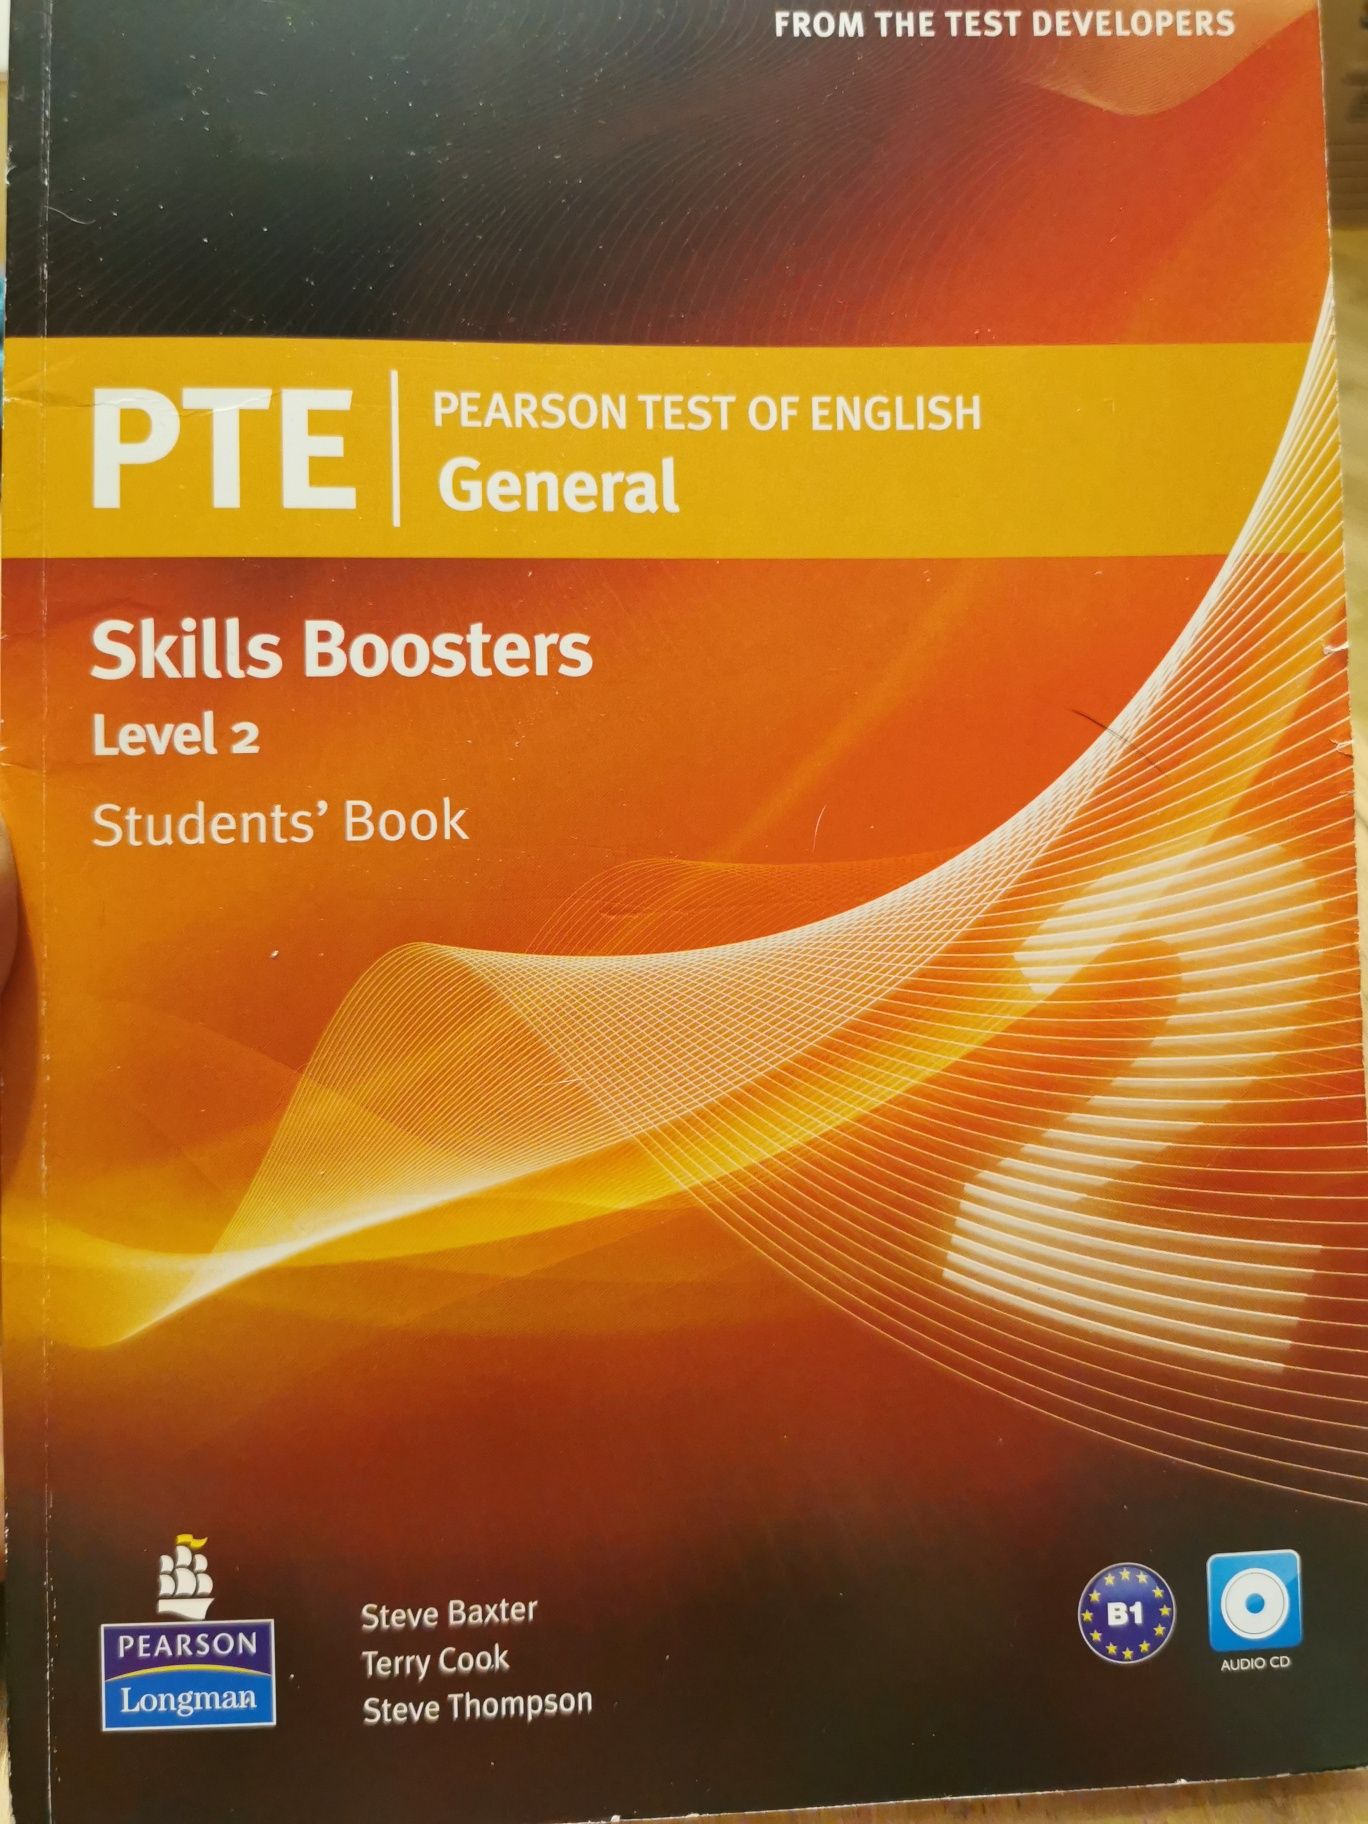 PTE Pearson test of English